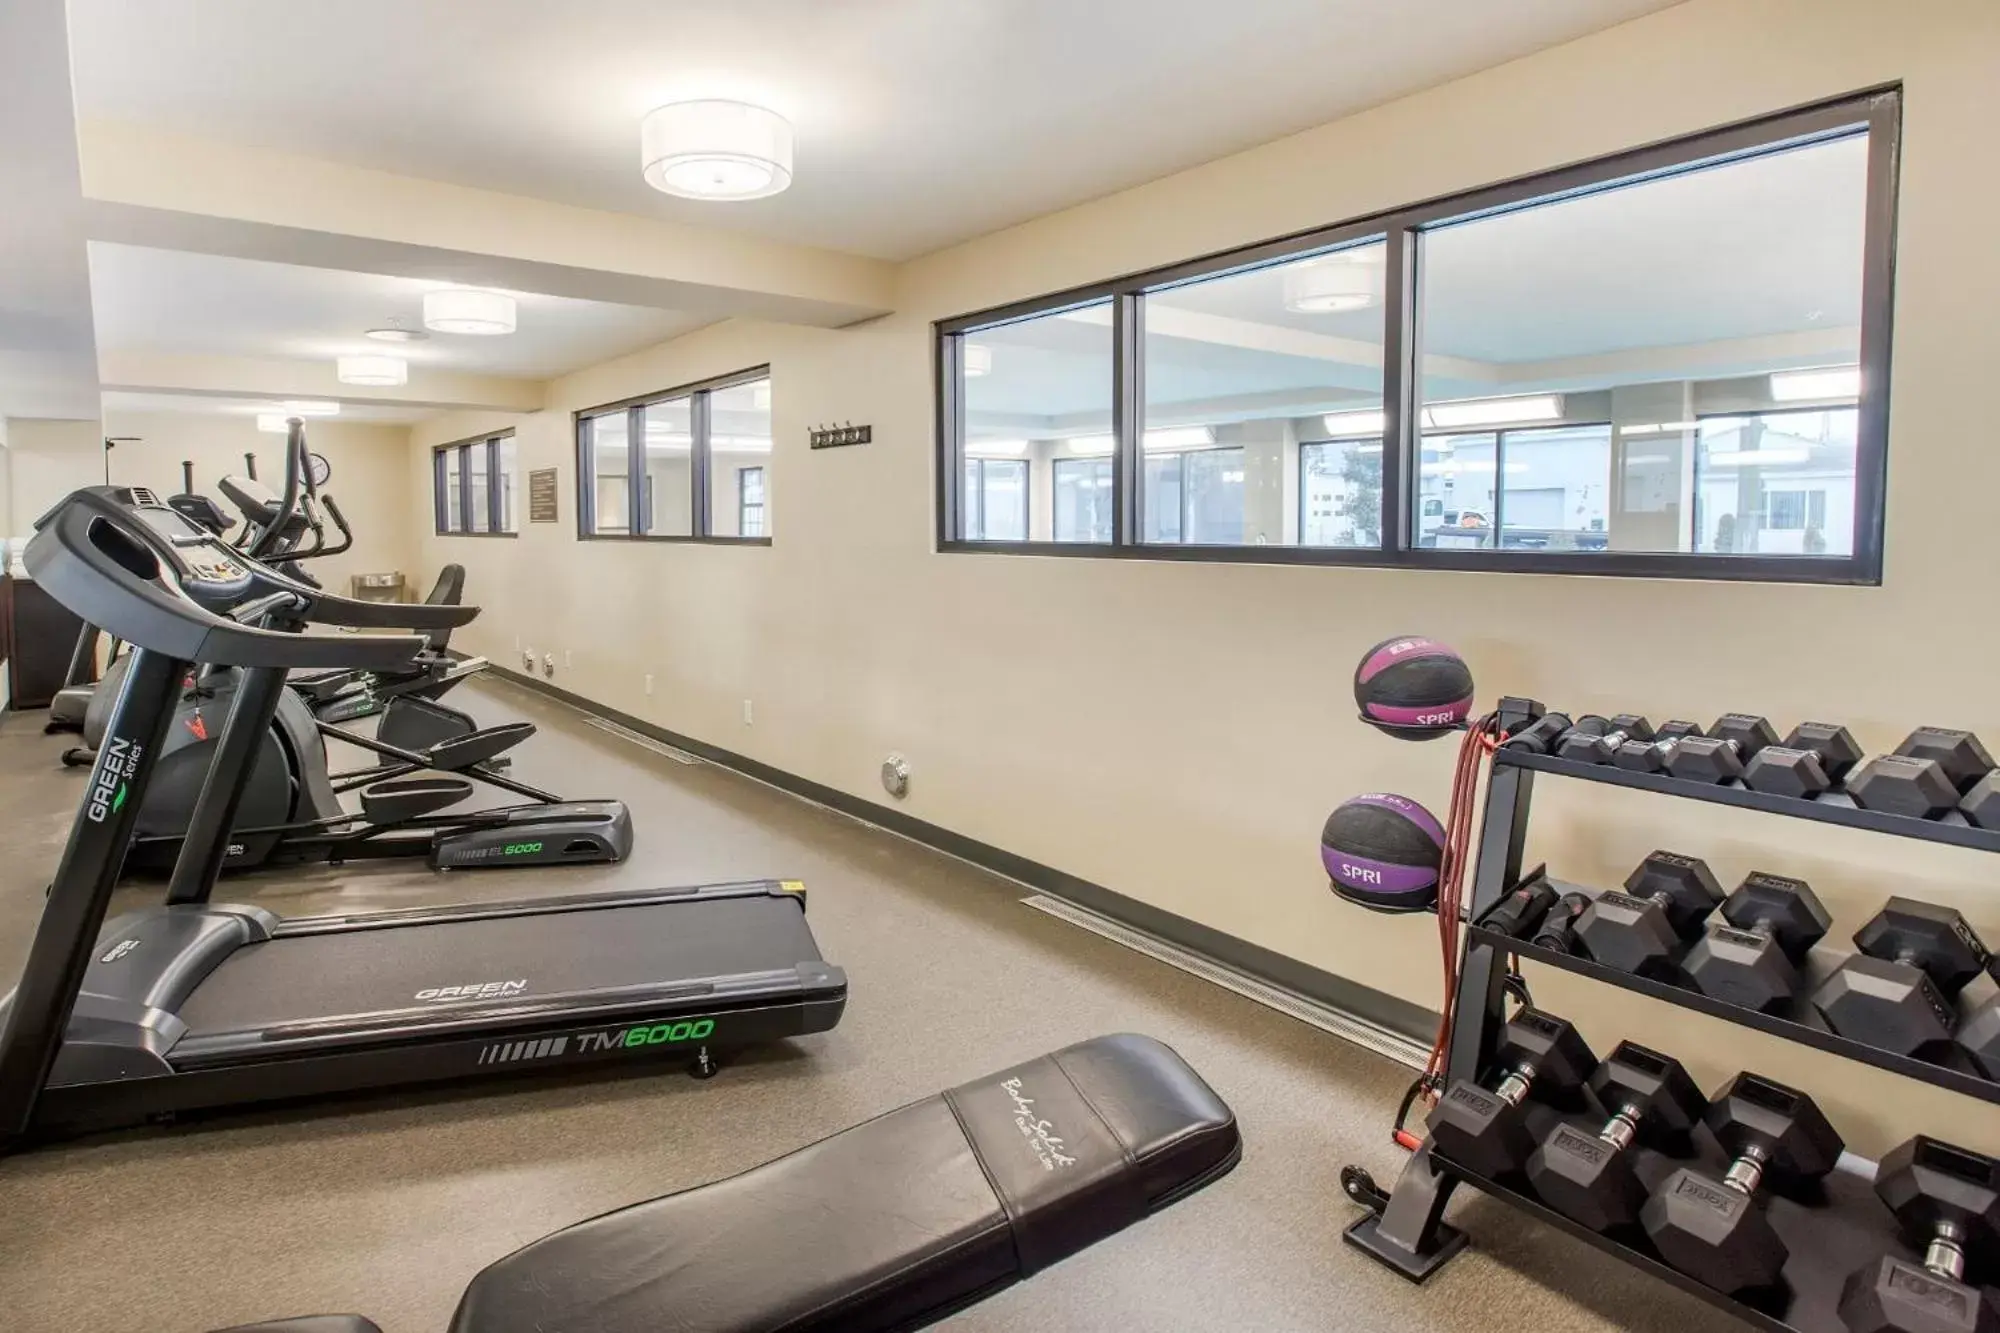 Fitness centre/facilities, Fitness Center/Facilities in Country Inn & Suites by Radisson, Grandville-Grand Rapids West, MI